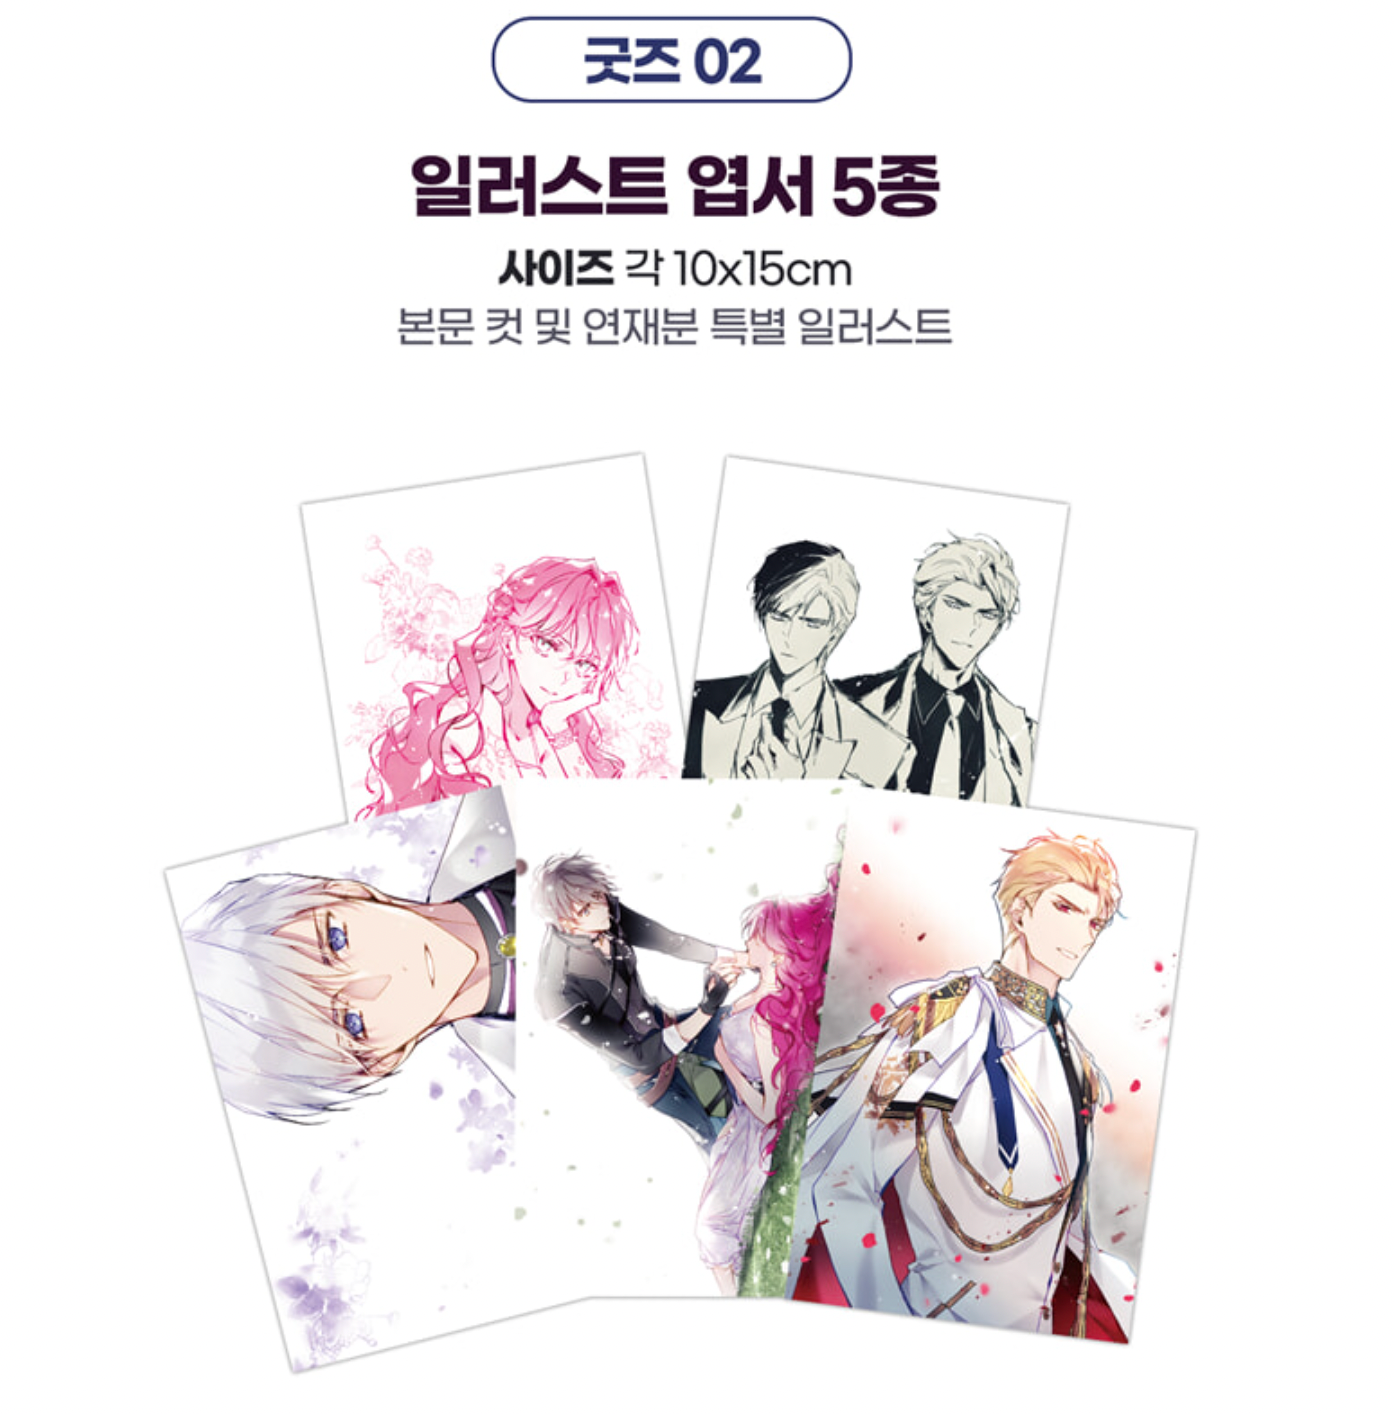 [Limited Edition]Death Is The Only Ending For The Villain by SUOL : vol.5 manhwa comics, villains are destined to die